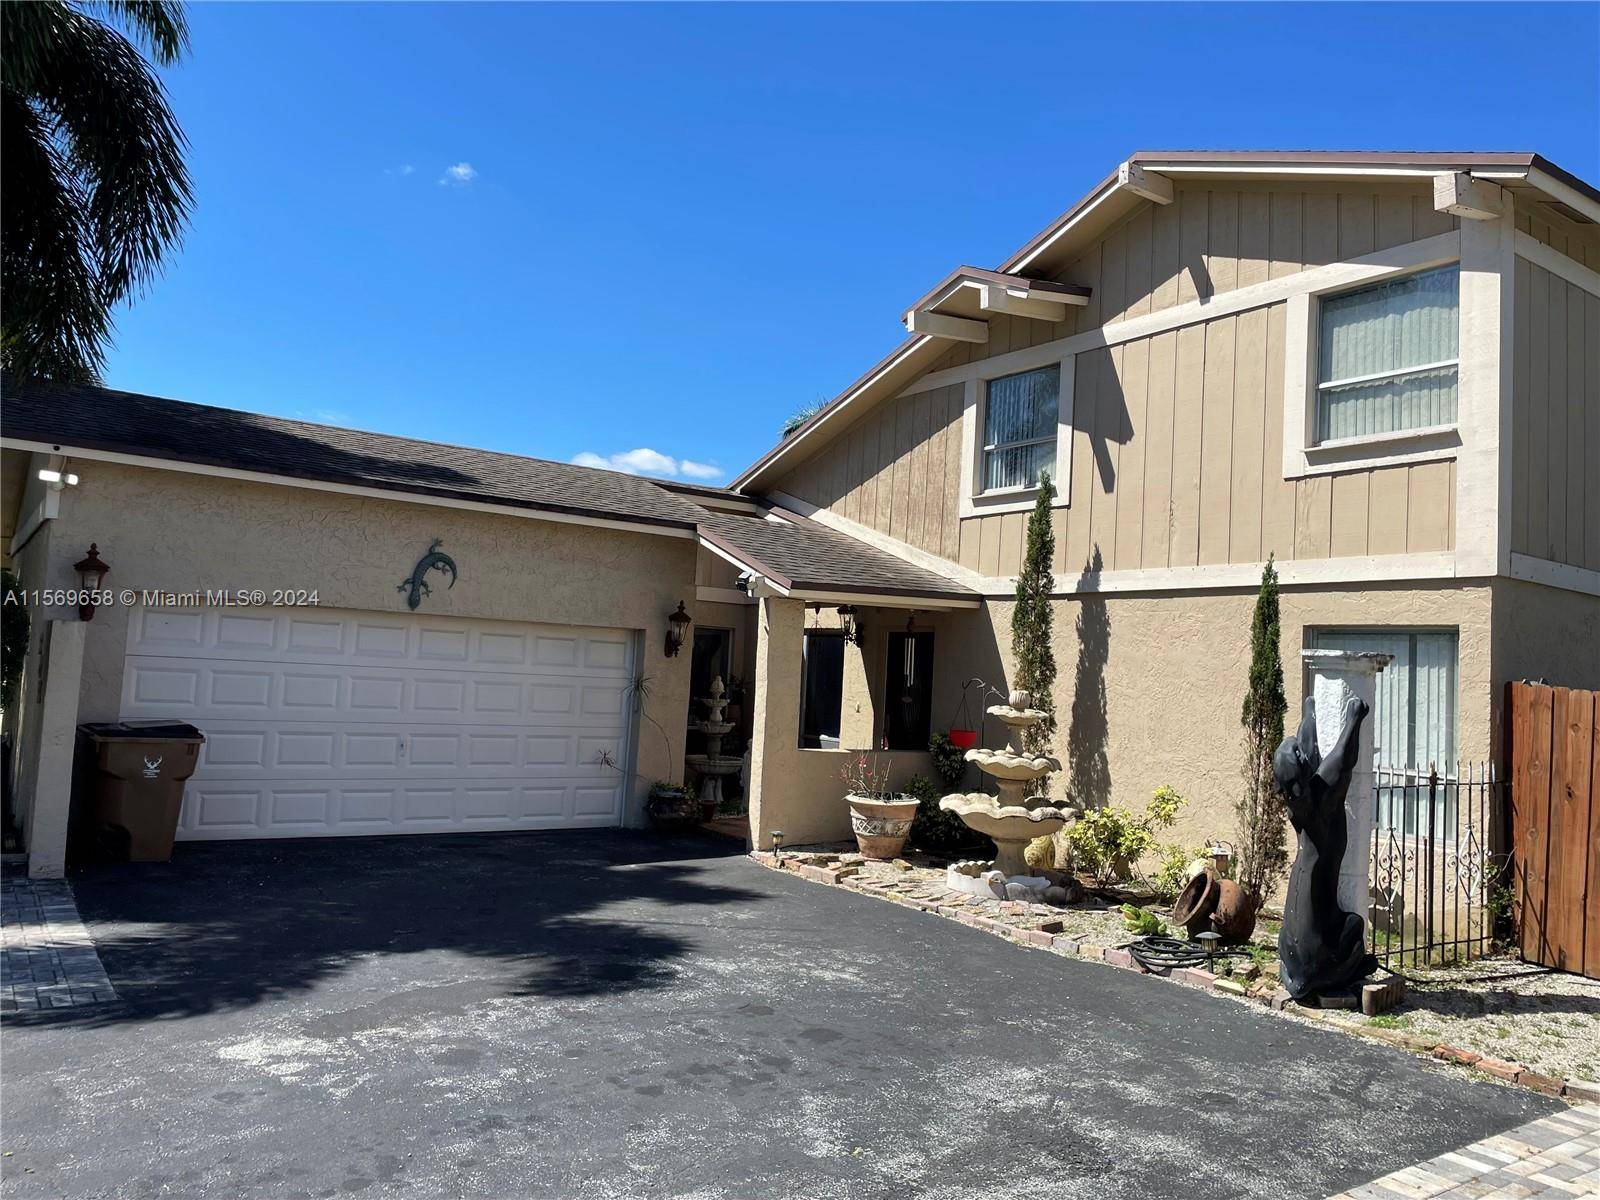 Don't miss out on this stunning 3 bedroom, 2 bathroom house conveniently located near shops, restaurants, and the beach, just minutes from the Brightline train station.